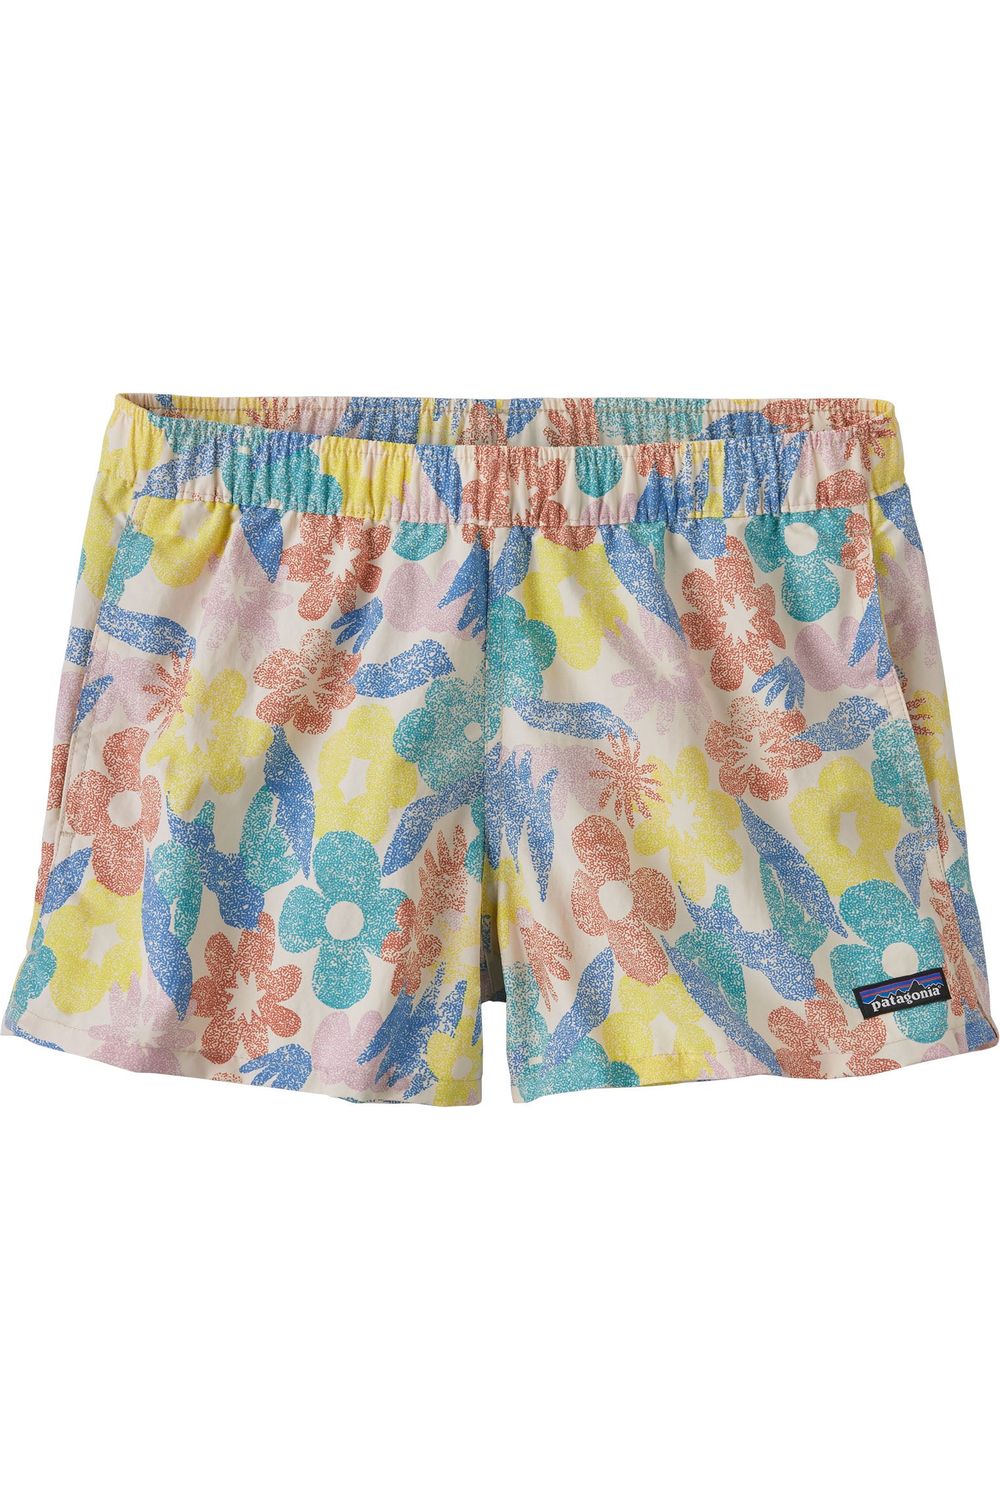 Patagonia Women's Barely Baggies Shorts 2 1/2in Channeling Spring: Natural